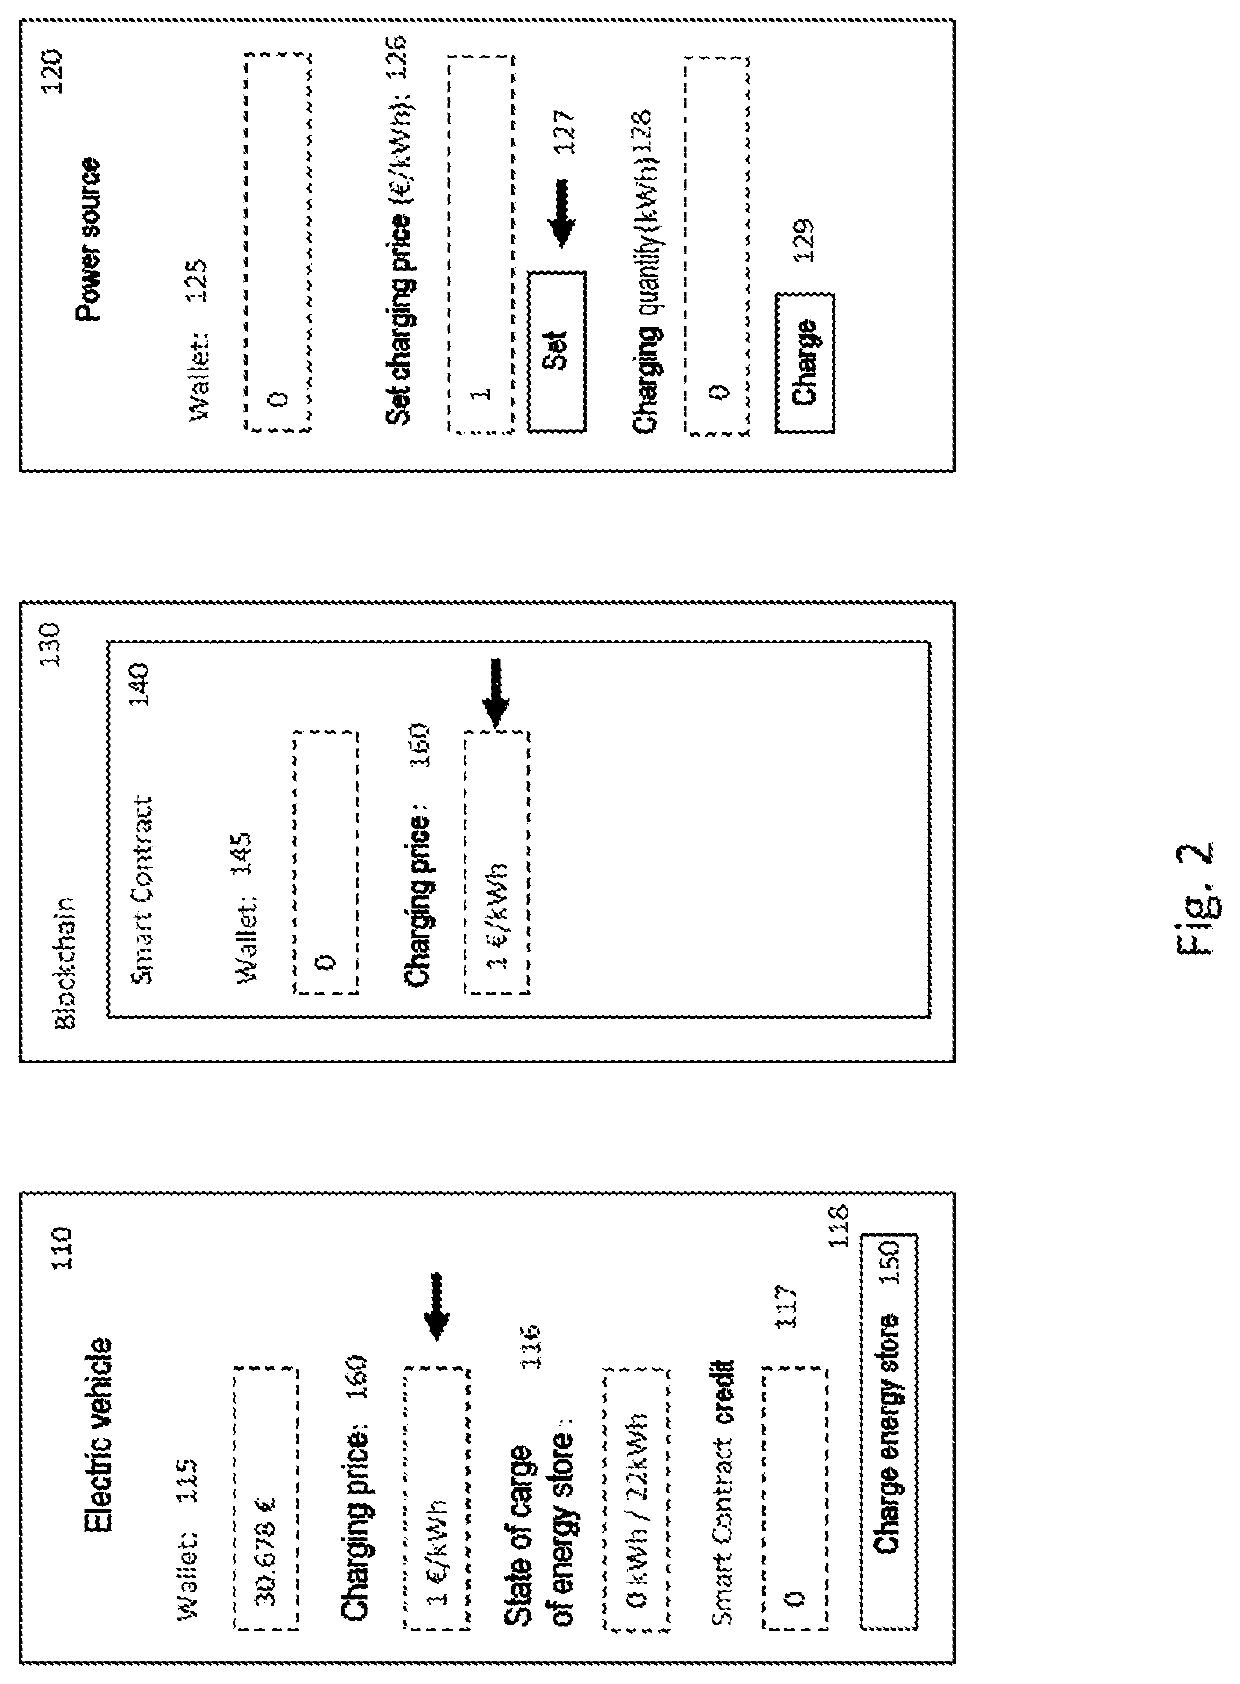 Charging System for Quickly and Securely Charging Electric Vehicles